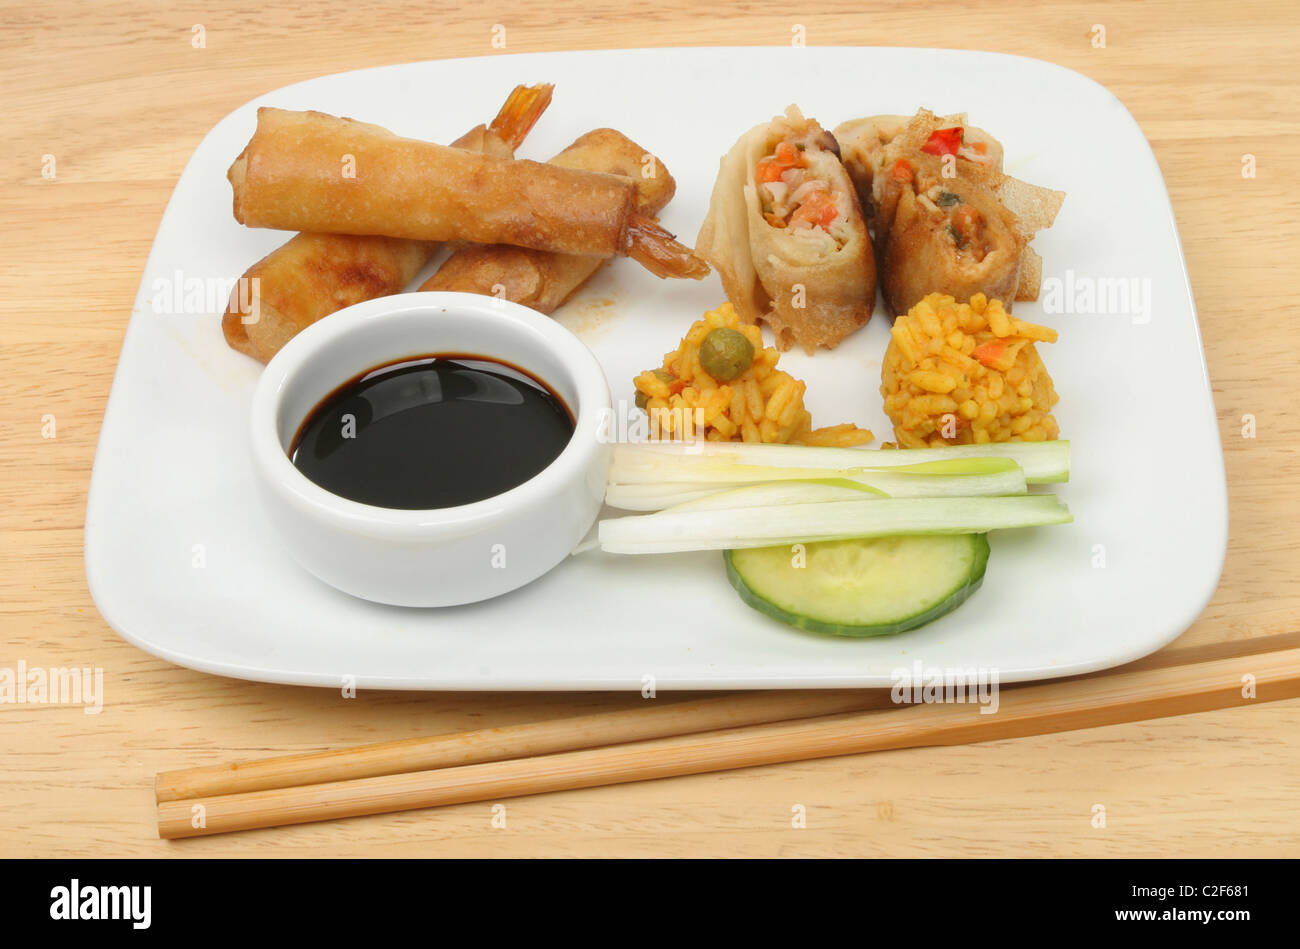 Selection of Chinese snacks on a plate on a wooden table Stock Photo